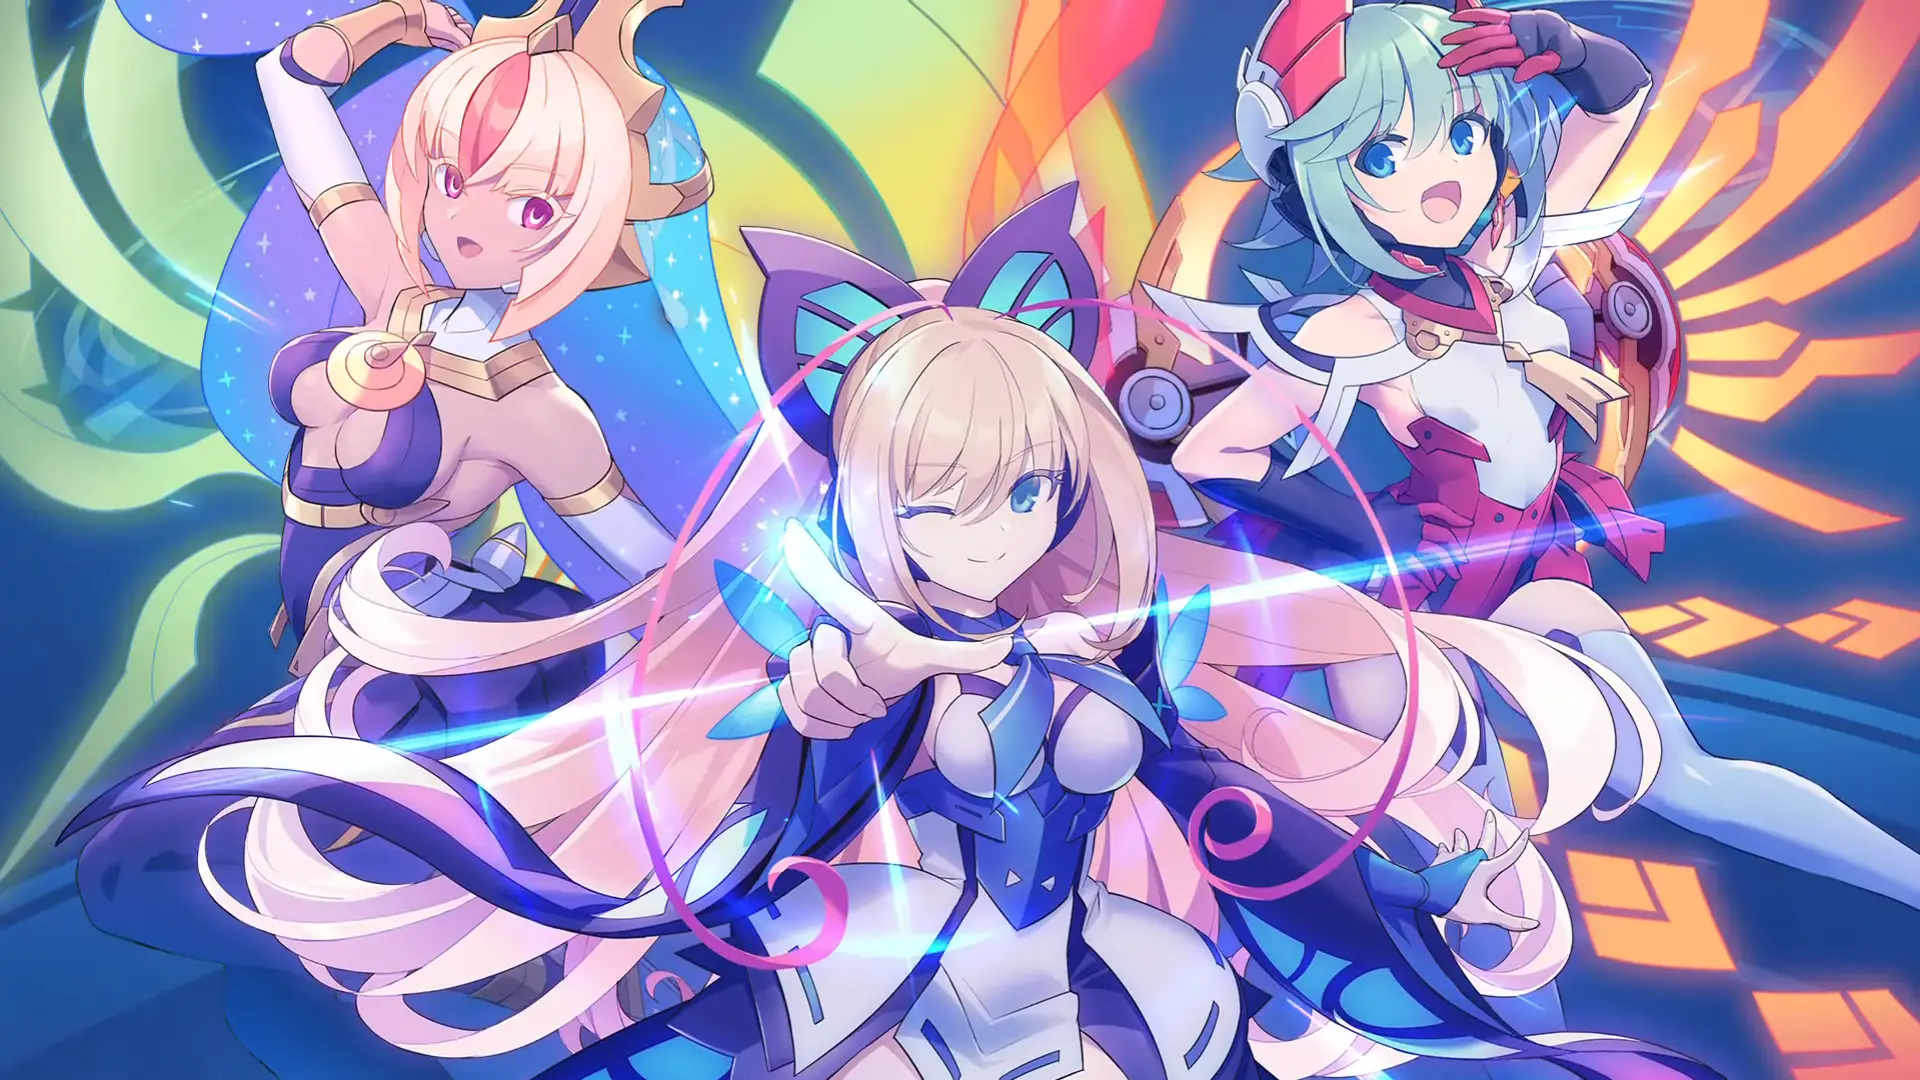 Gunvolt Records: Cychronicle Reveals New Gameplay Video Featuring “Sign”